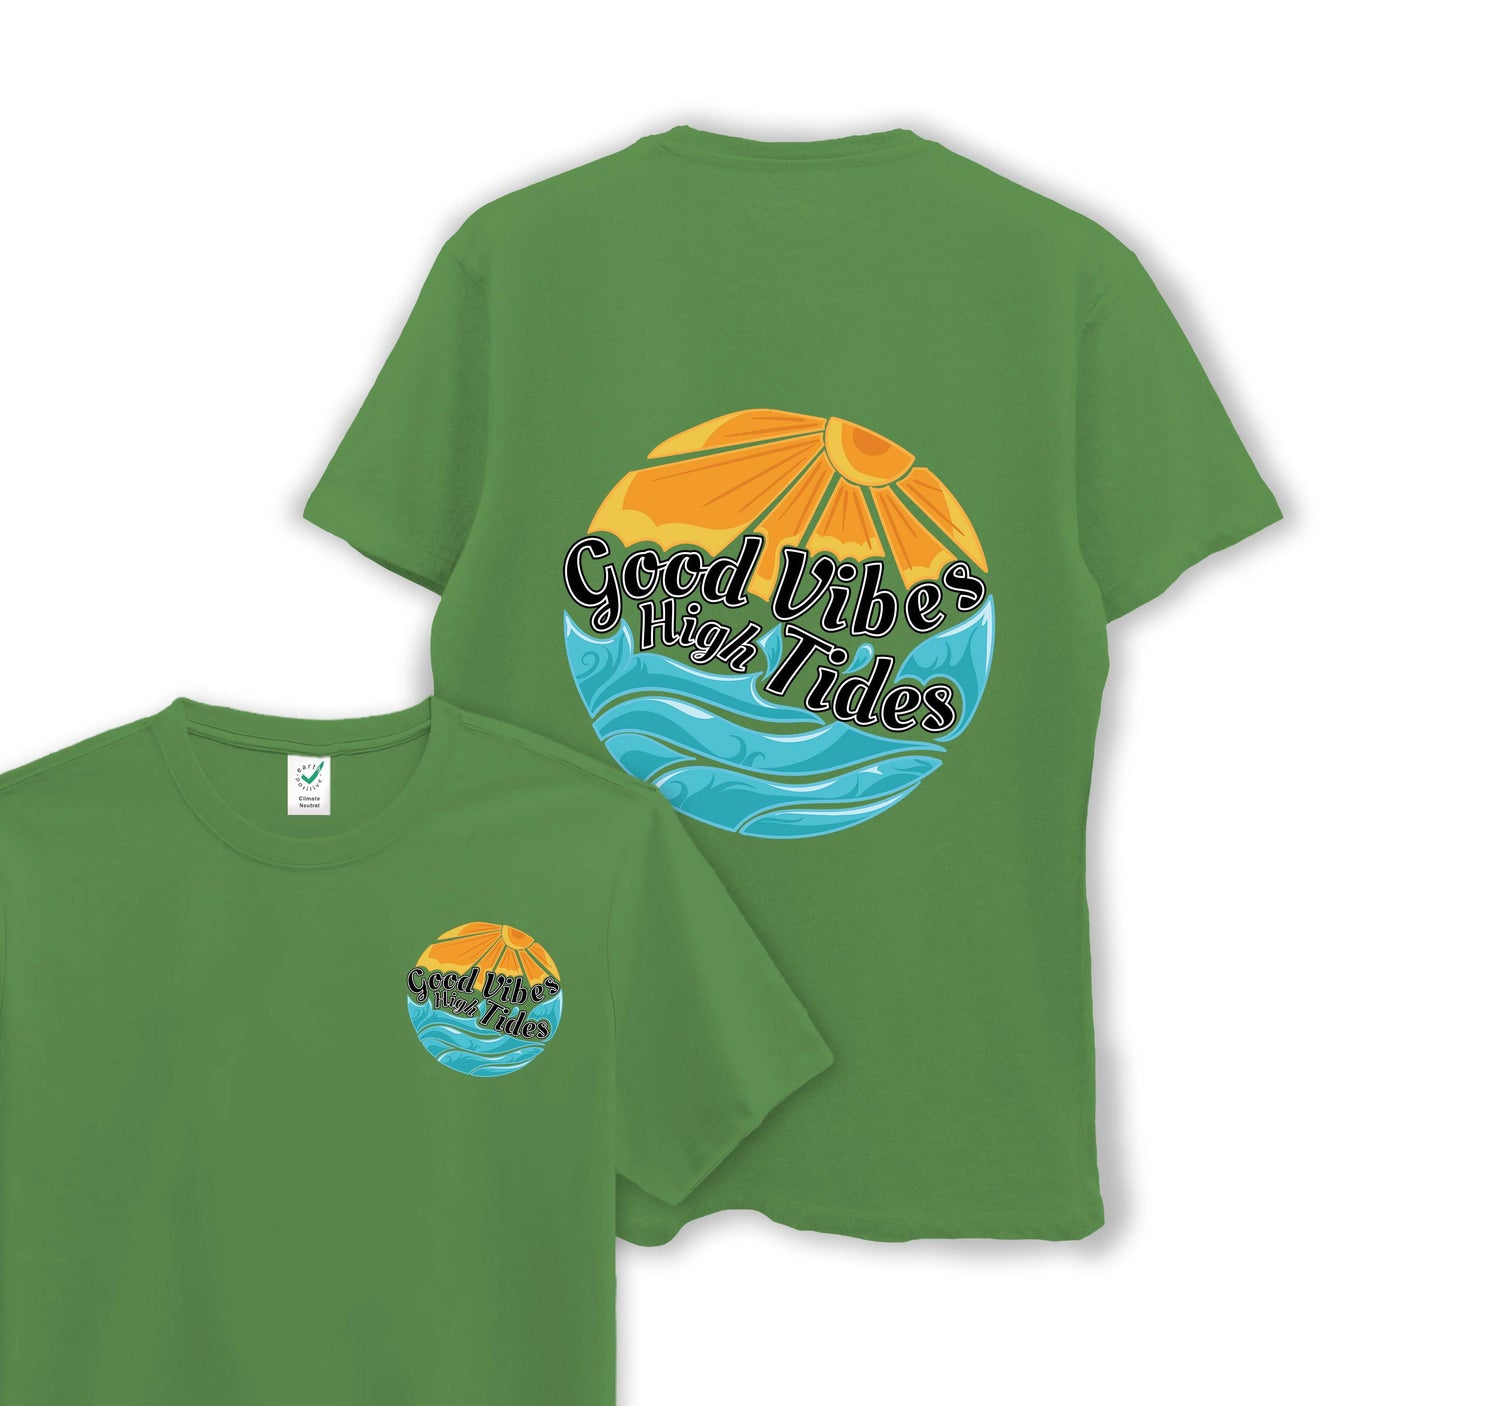 Good Vibes With High Tides - Organic Cotton Tee - One Choice Apparel